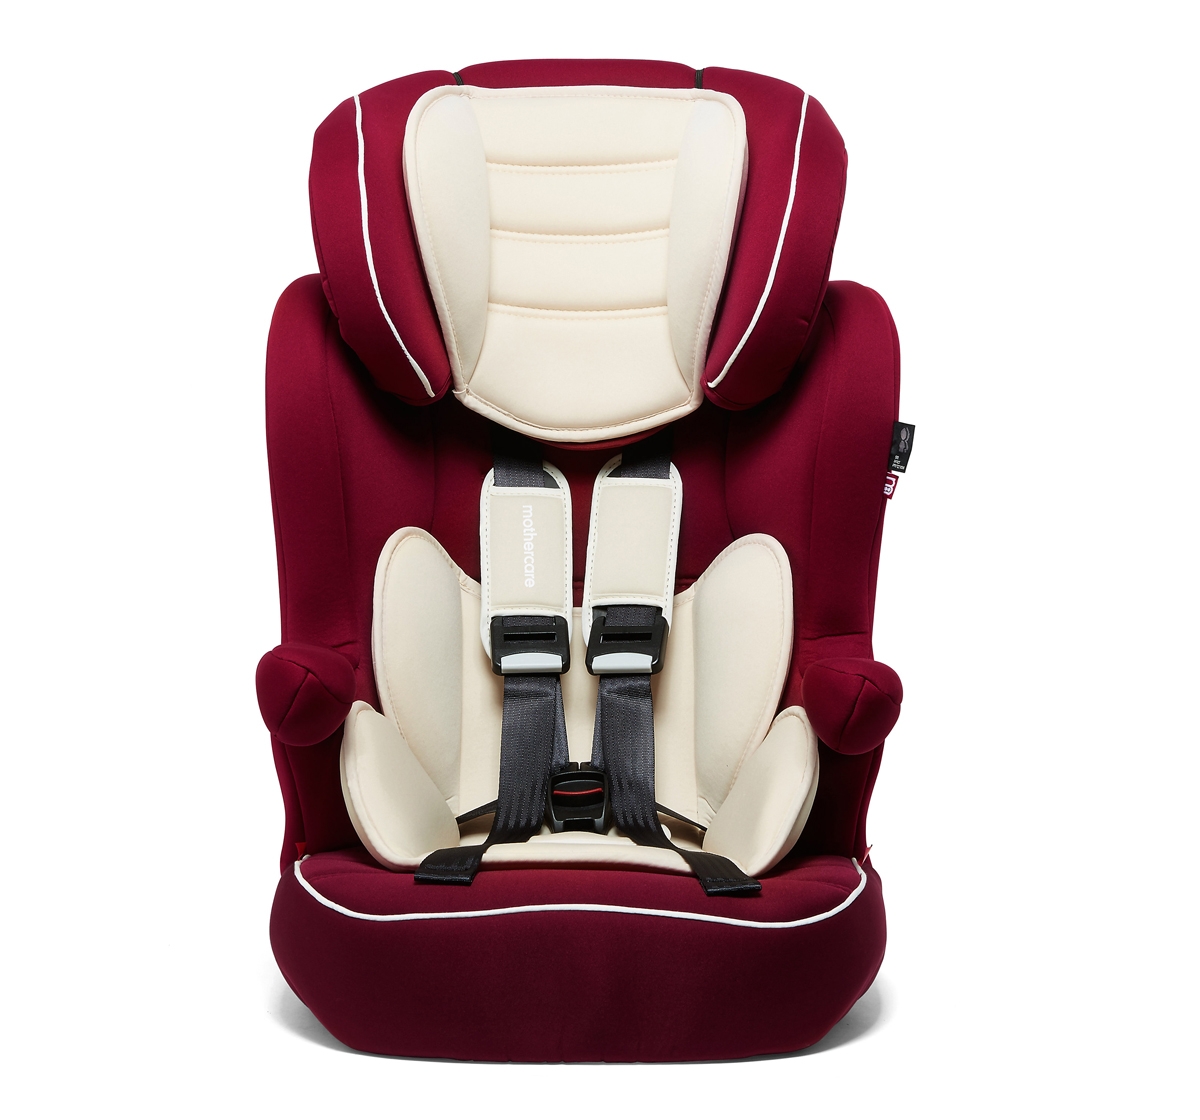 Mothercare | Mothercare Advance Xp Highback Booster Car Seat - Red